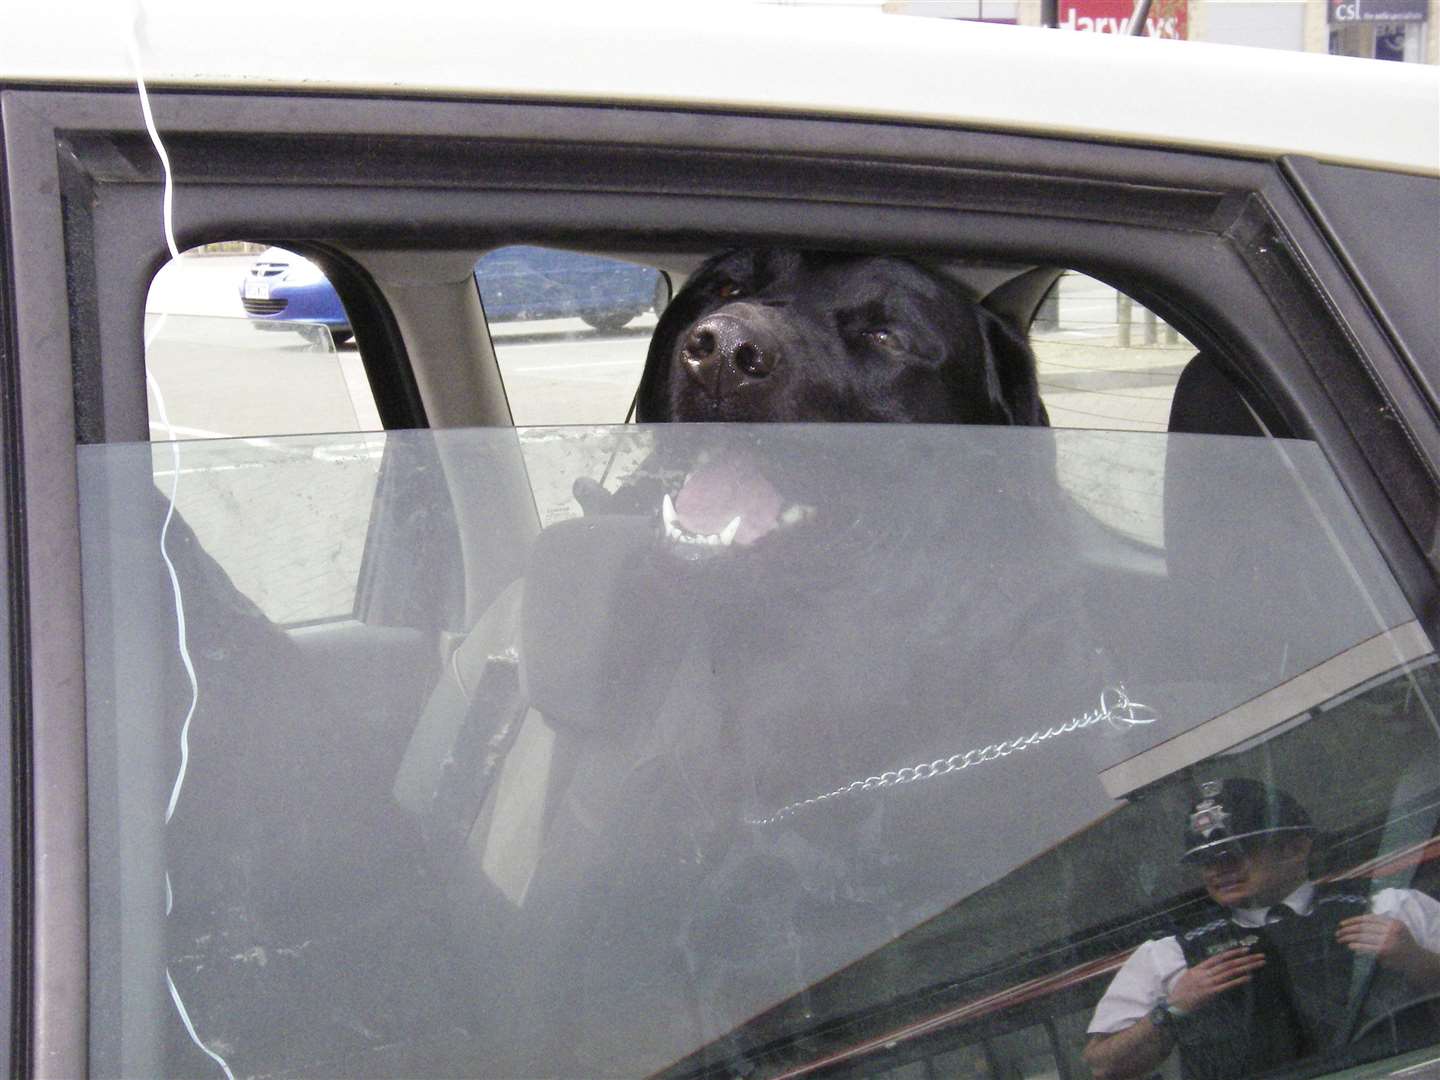 Single adult Labrador sitting in hot car. Photograph courtesy of RSPCA